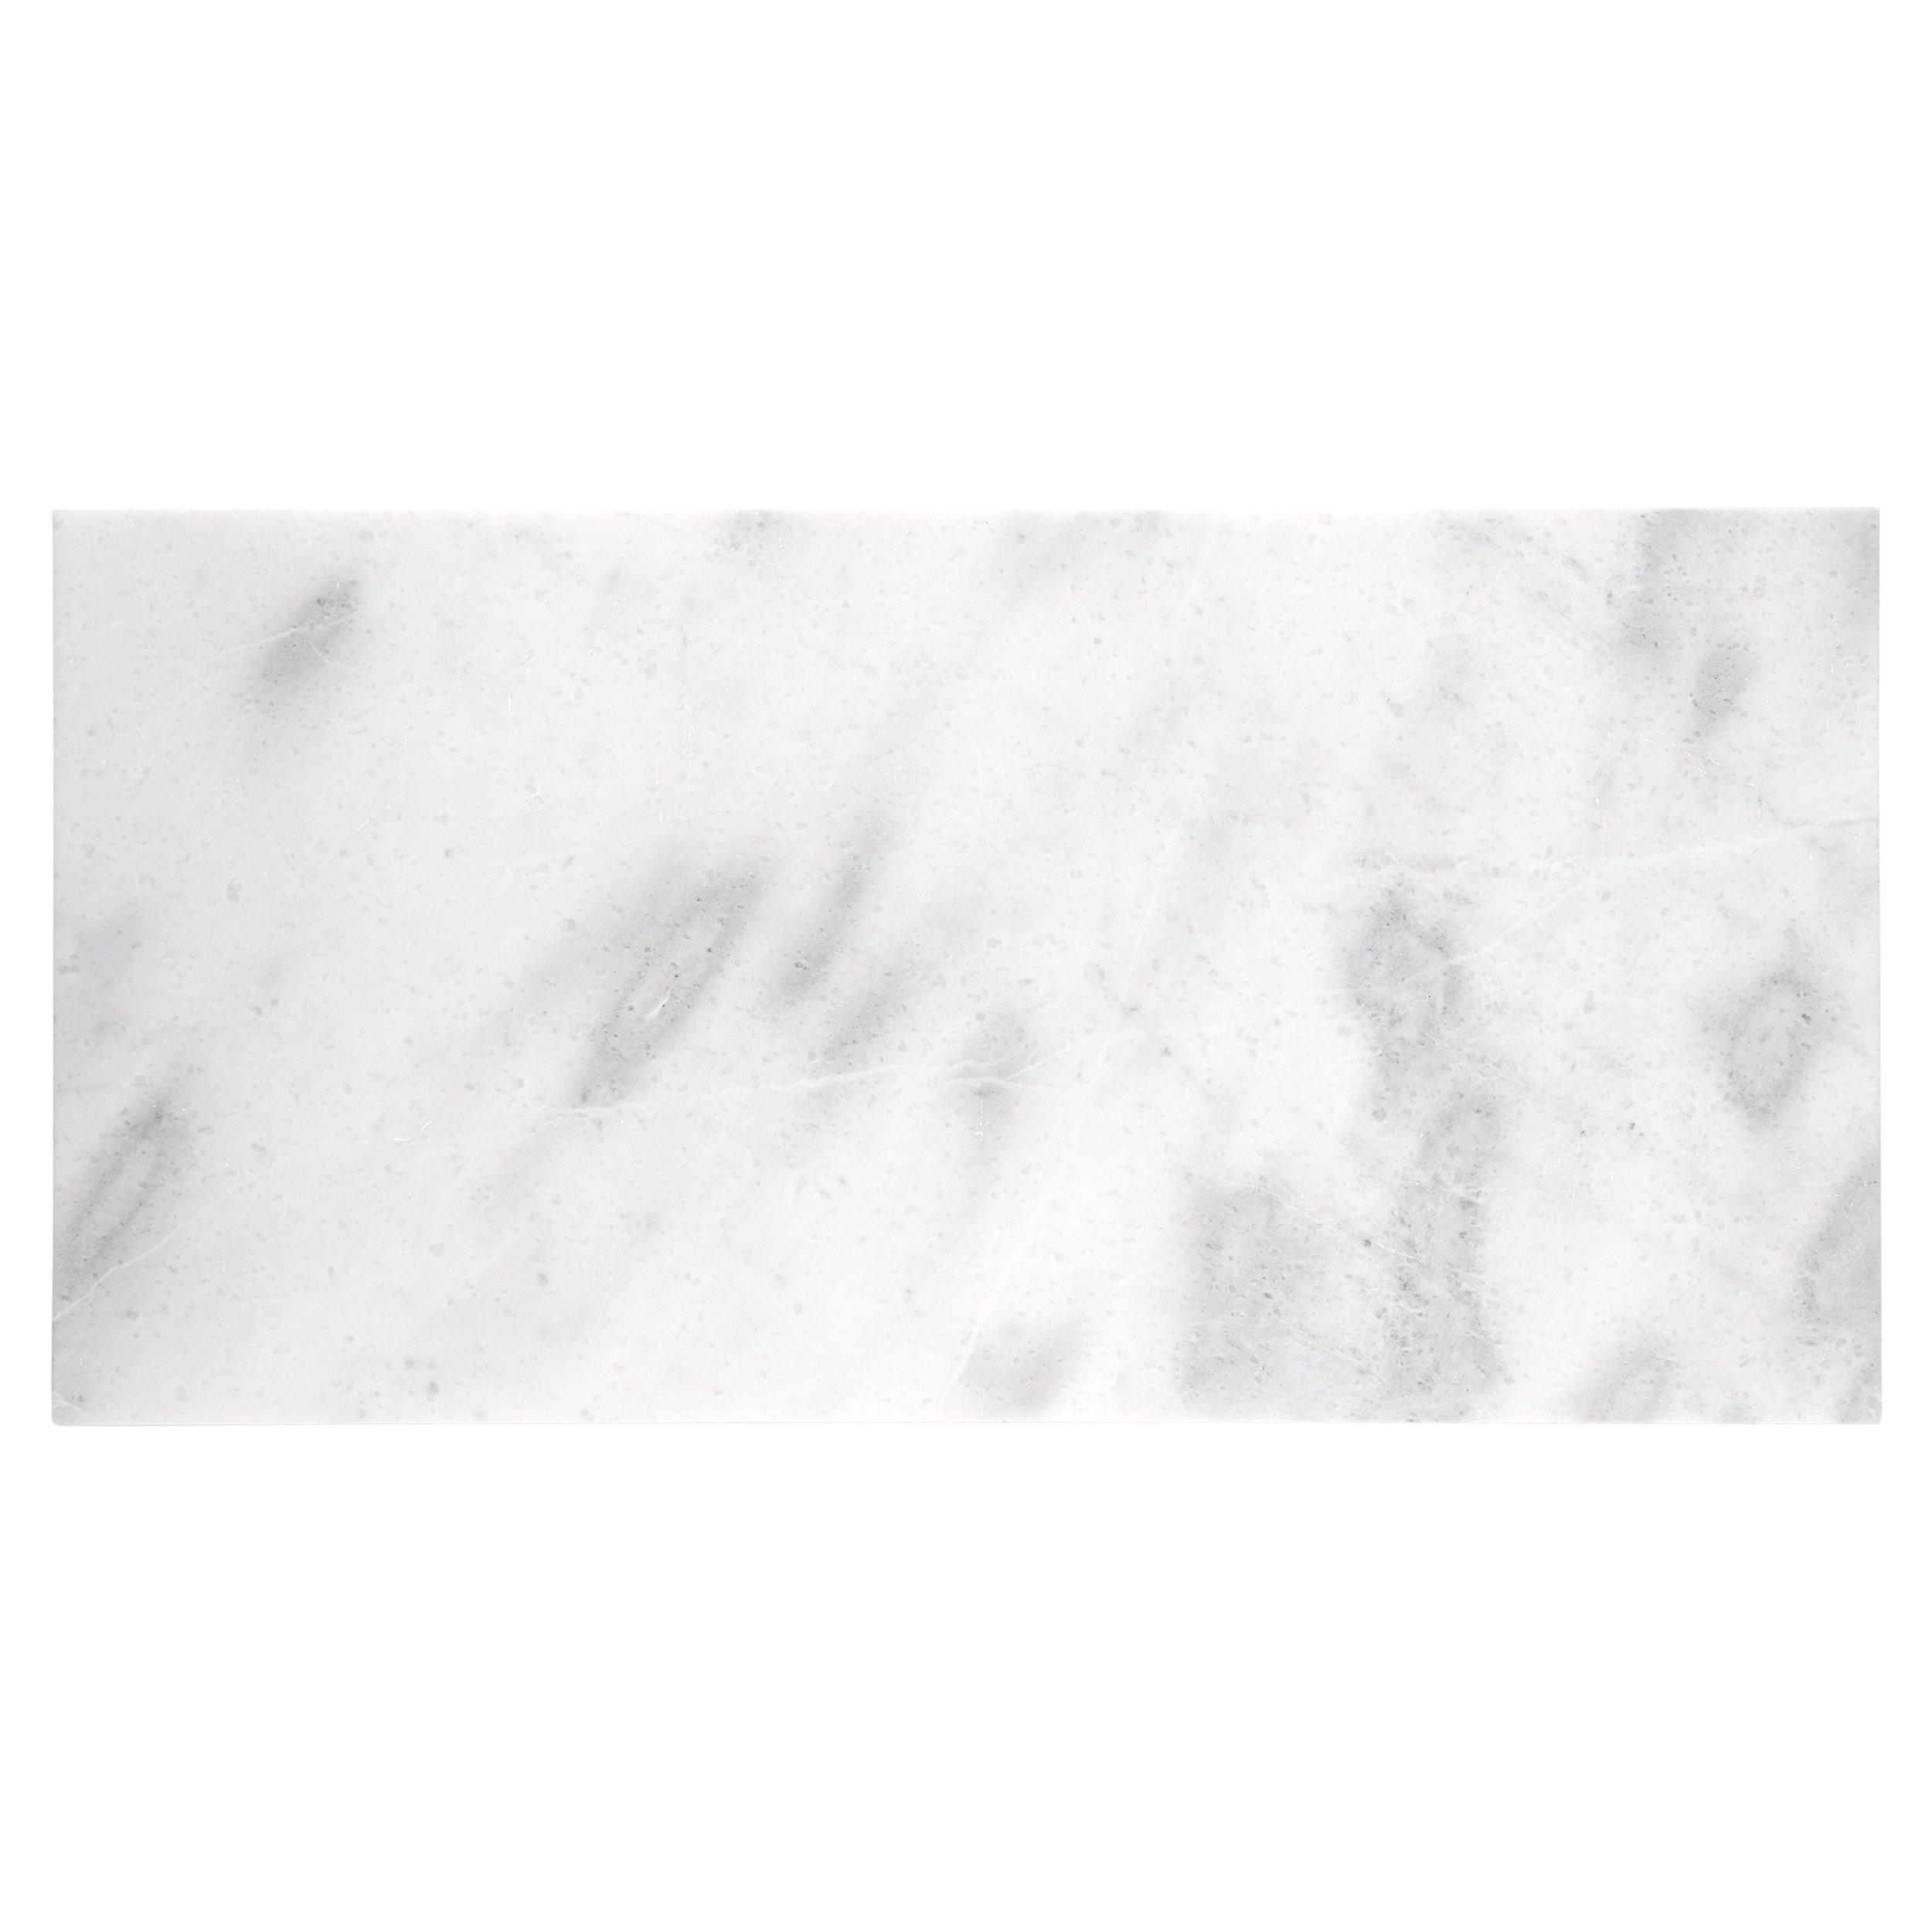 Thassos Commercial Polished Marble Stone Tile - 24 x 48 - 100840230 ...